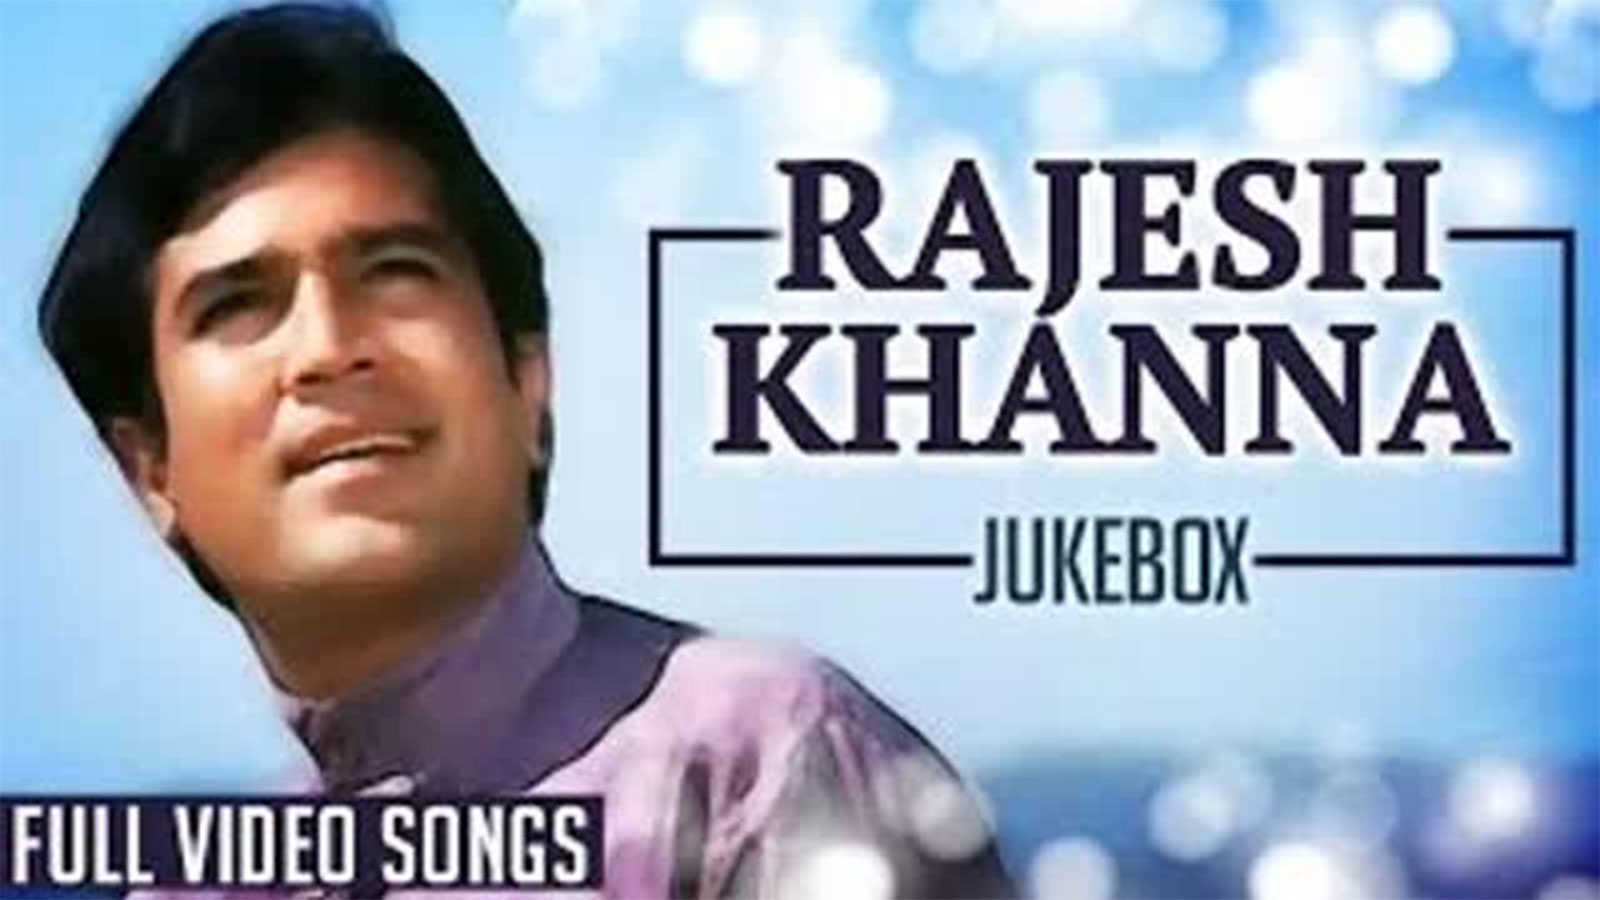 Listen to all time classic hit Hindi songs of Rajesh Khanna (Jukebox) |  Hindi Video Songs - Times of India